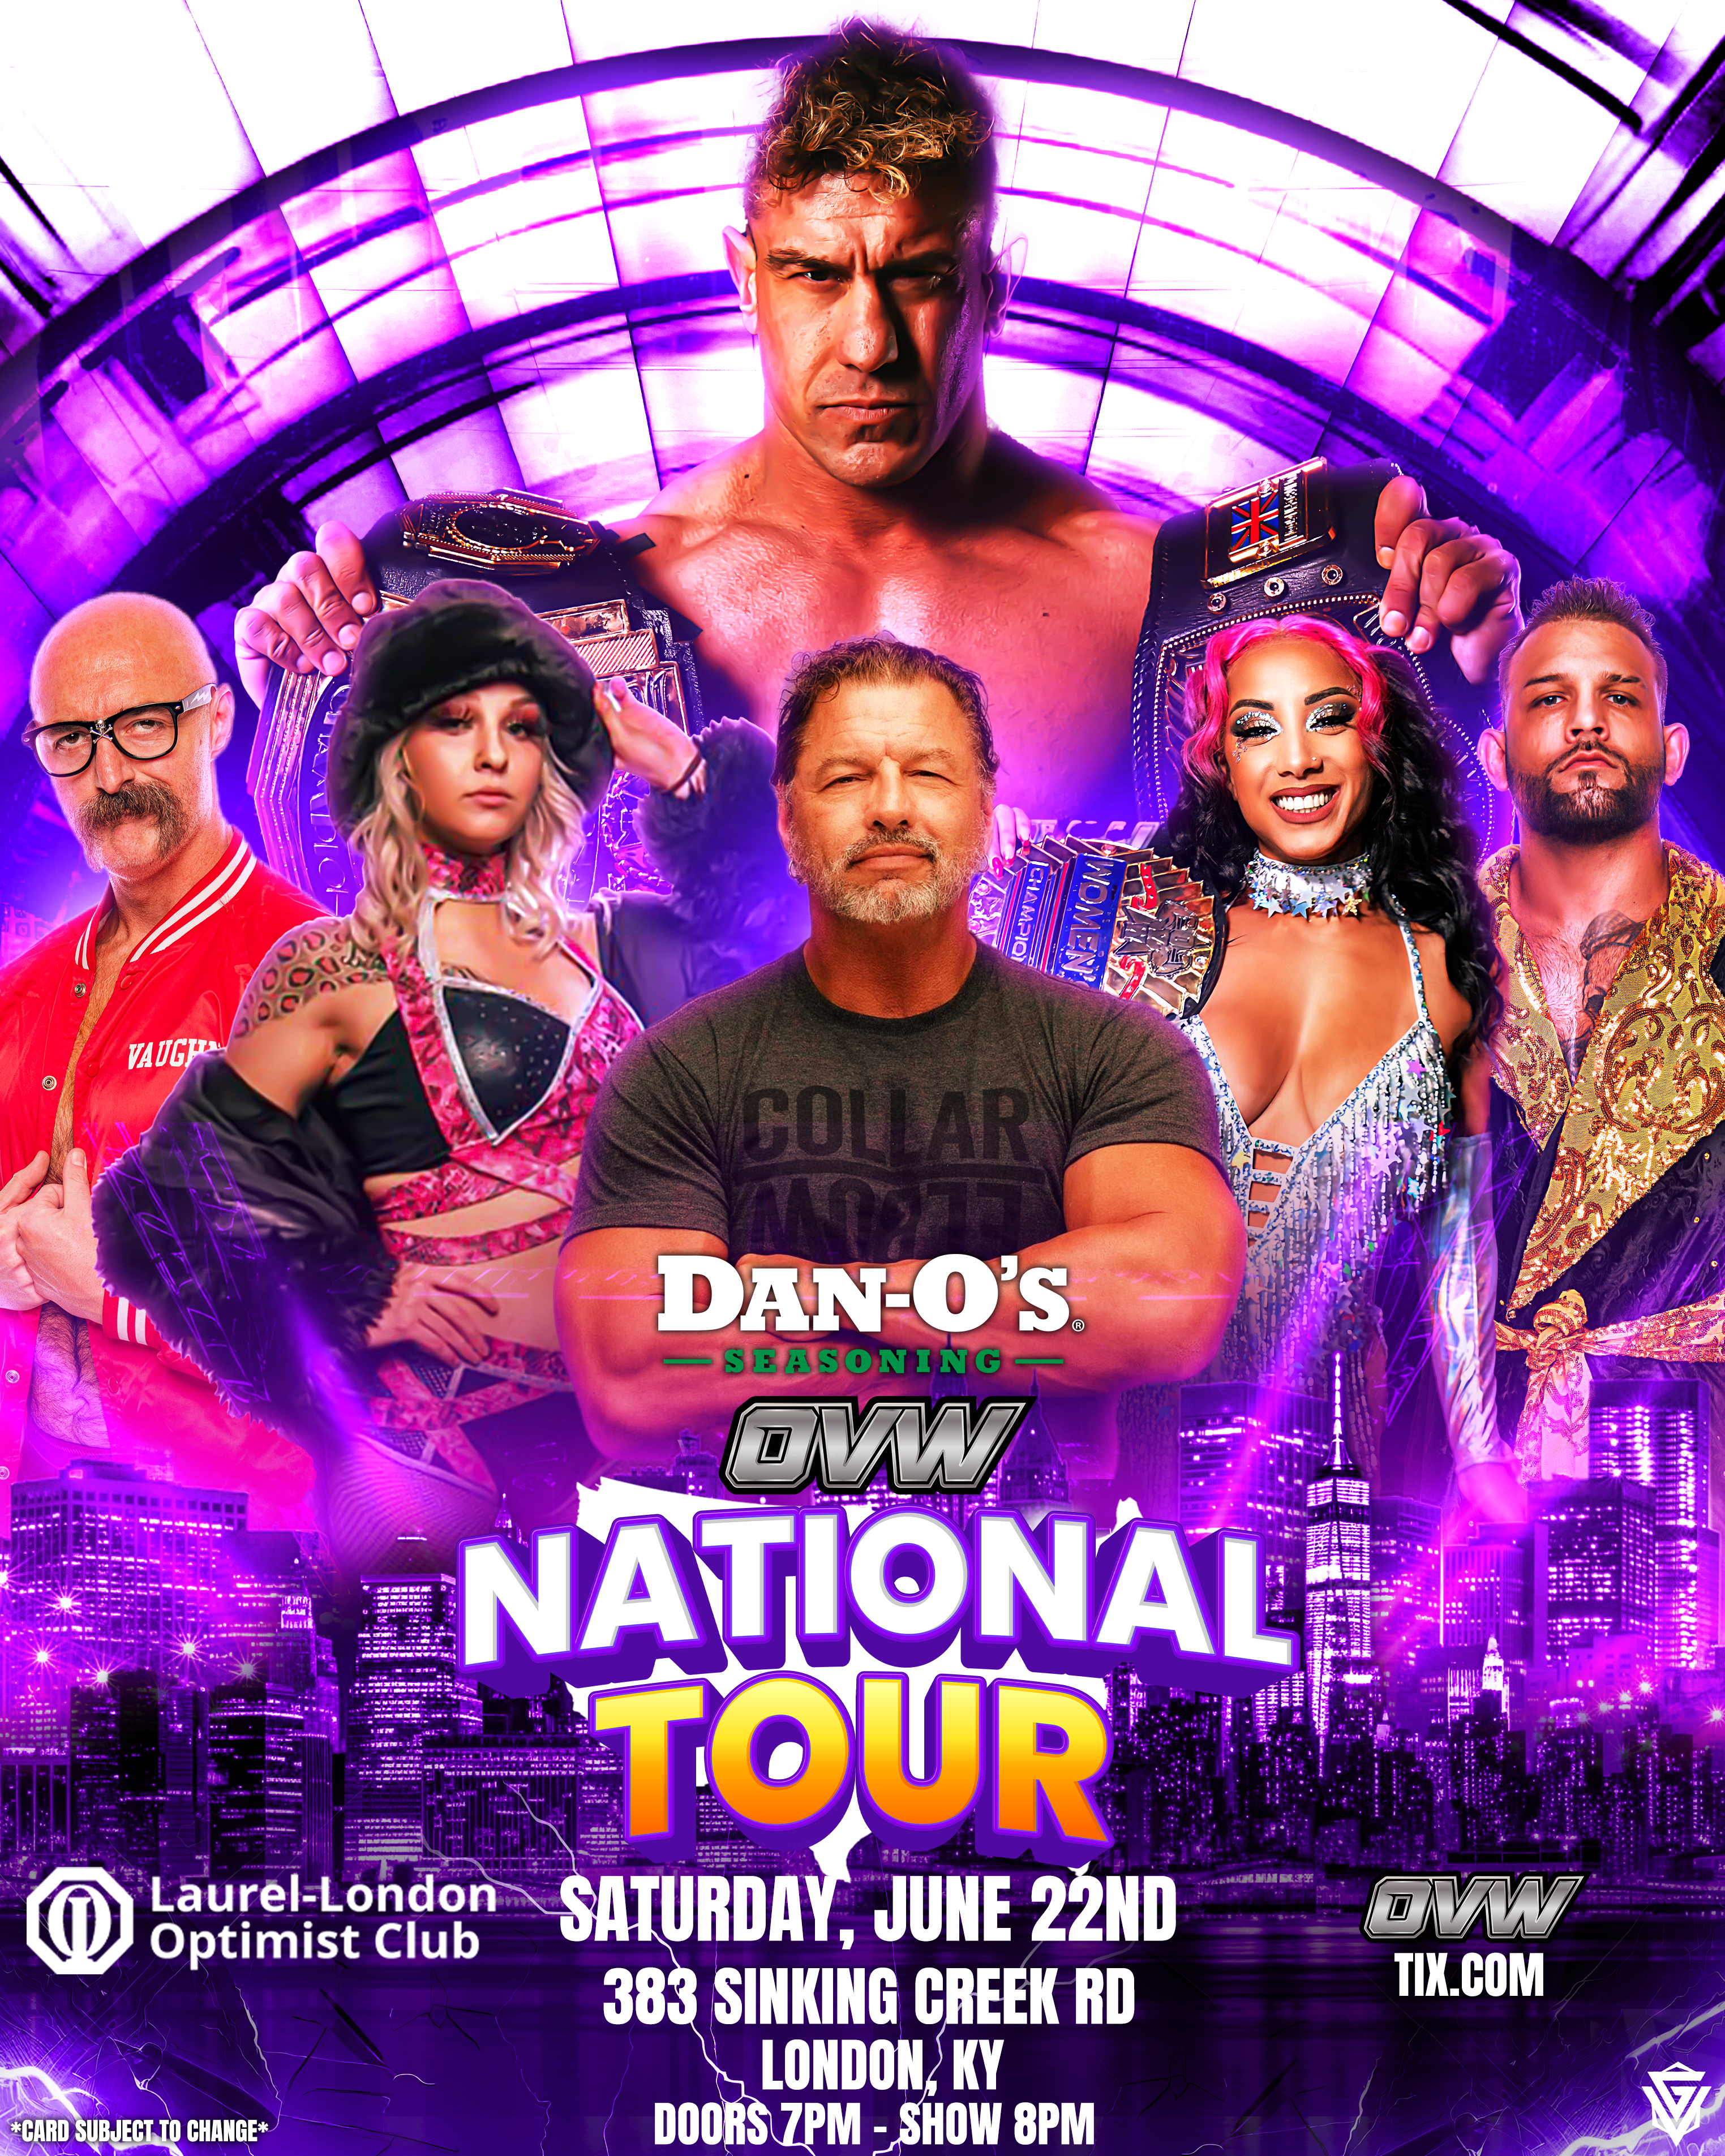 OVW NATIONAL TOUR POSTER LONDON KY.png__PID:c81e0065-e6a0-4835-9ab3-1587548beb39